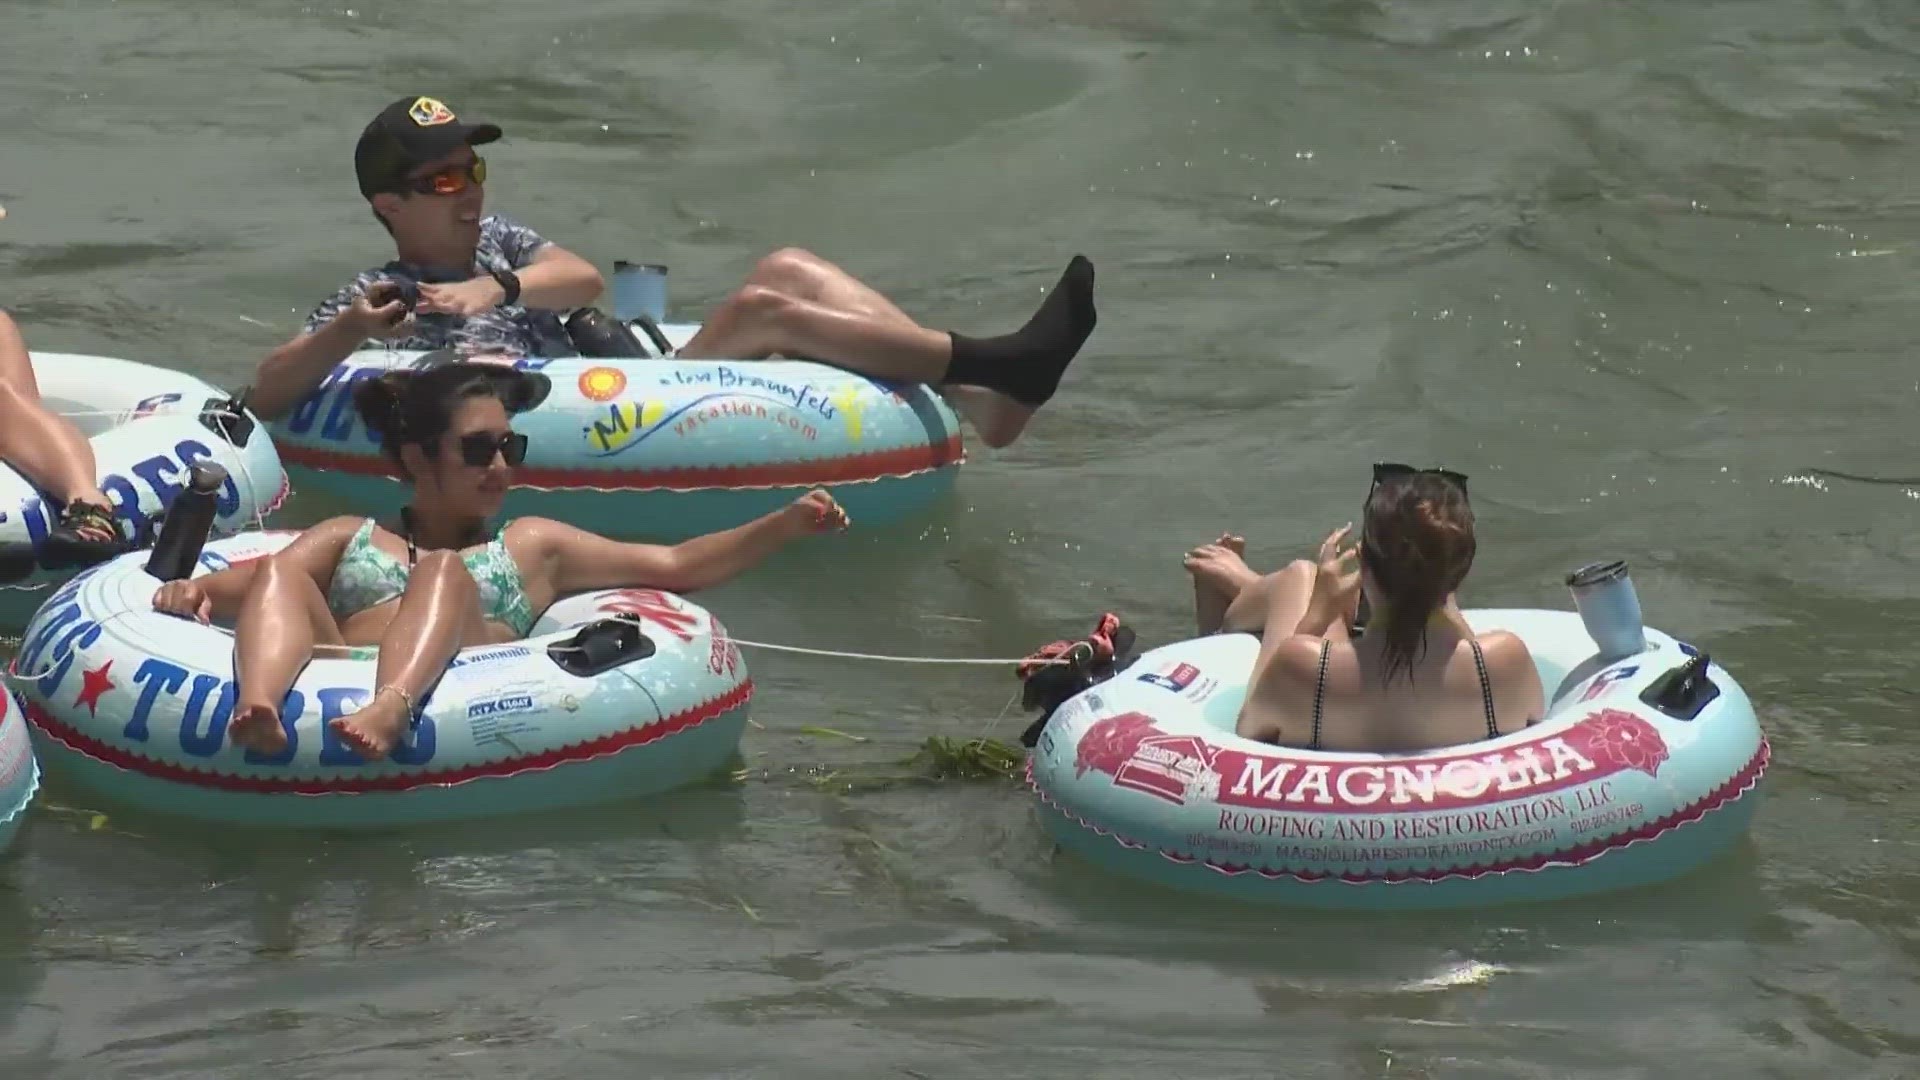 Officials in New Braunfels are excited for the start of their tourism season, but they want visitors to heed their advice.